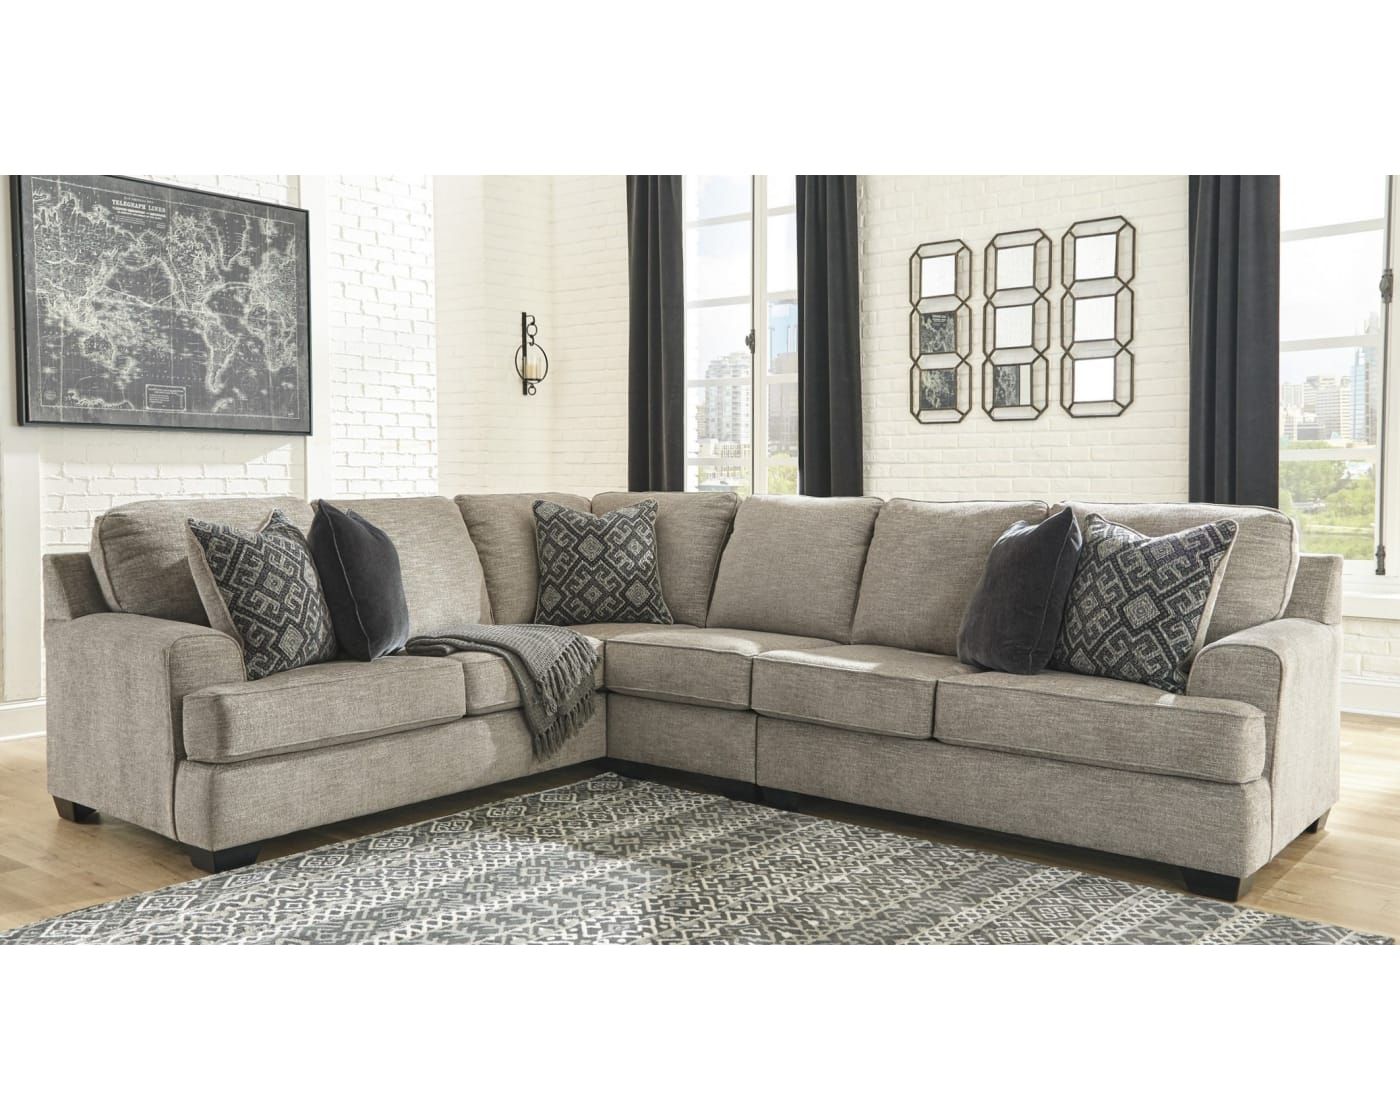 Bovarian Stone 3 Piece Right Facing Sectional Sofa With Dulce Right Sectional Sofas Twill Stone (View 5 of 15)